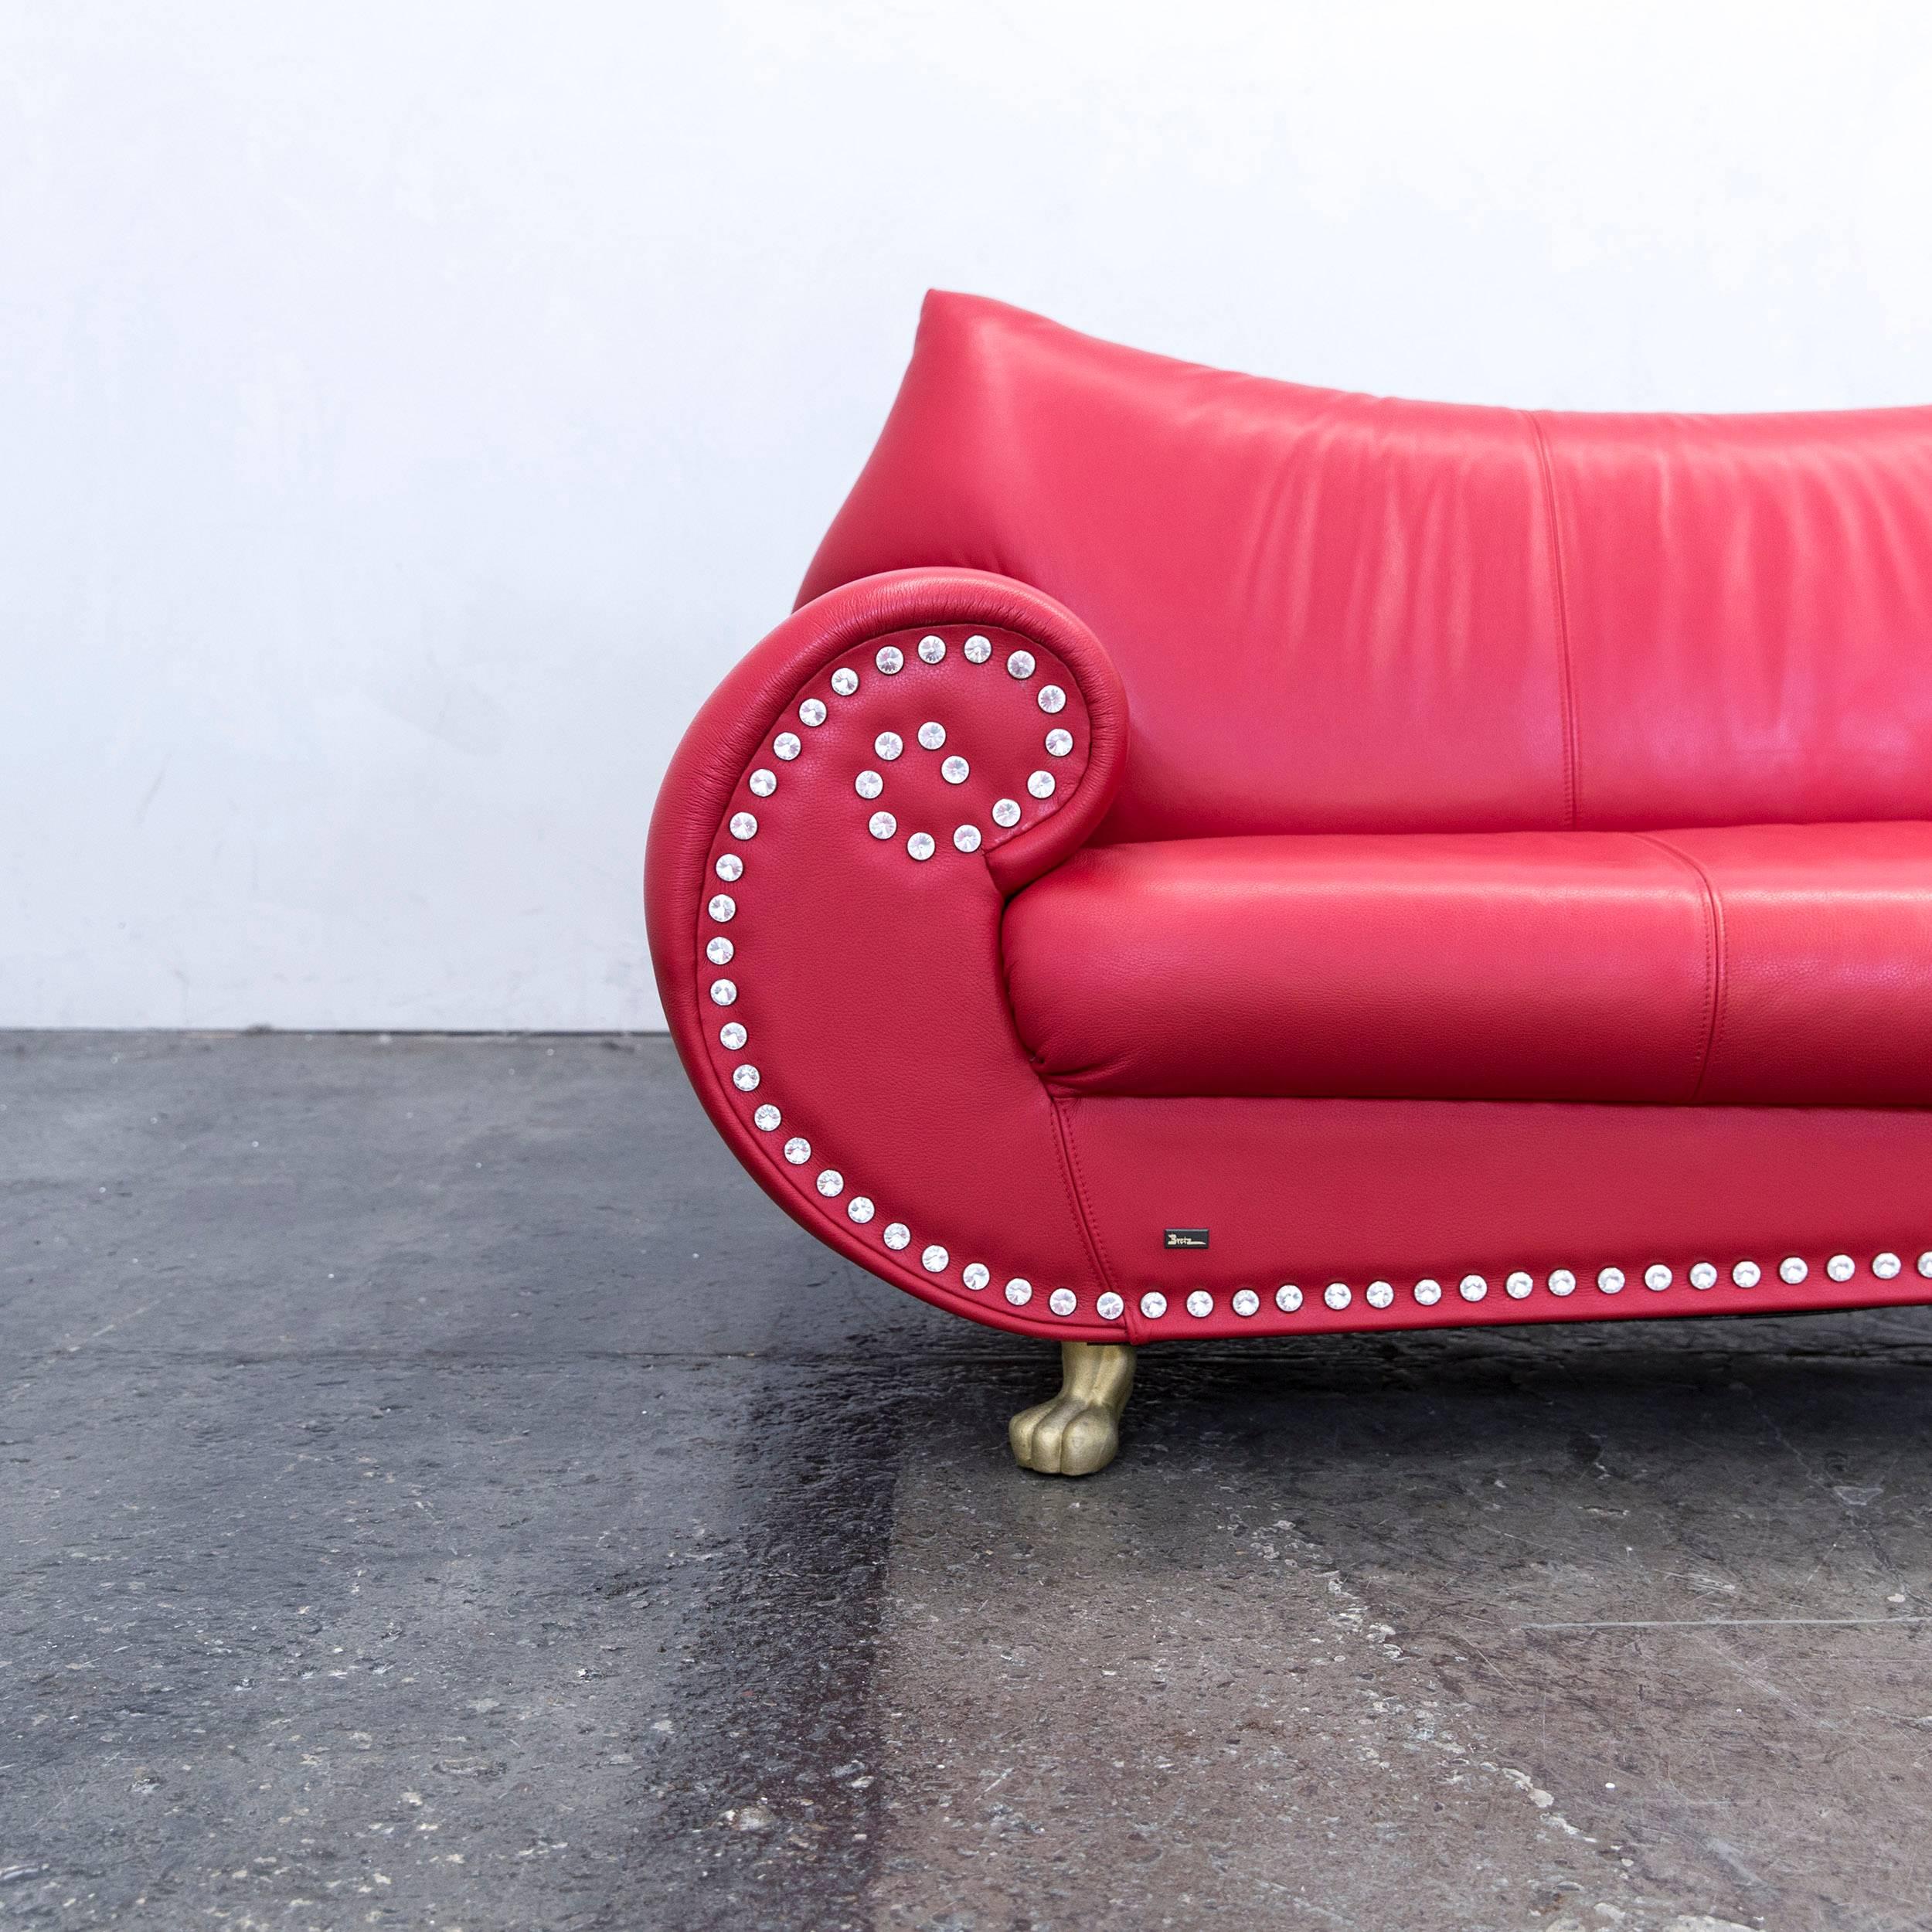 Red colored original Bretz Gaudi designer leather sofa in a minimalistic and modern design, with original Swarovski crystals, made for pure elegance and style.